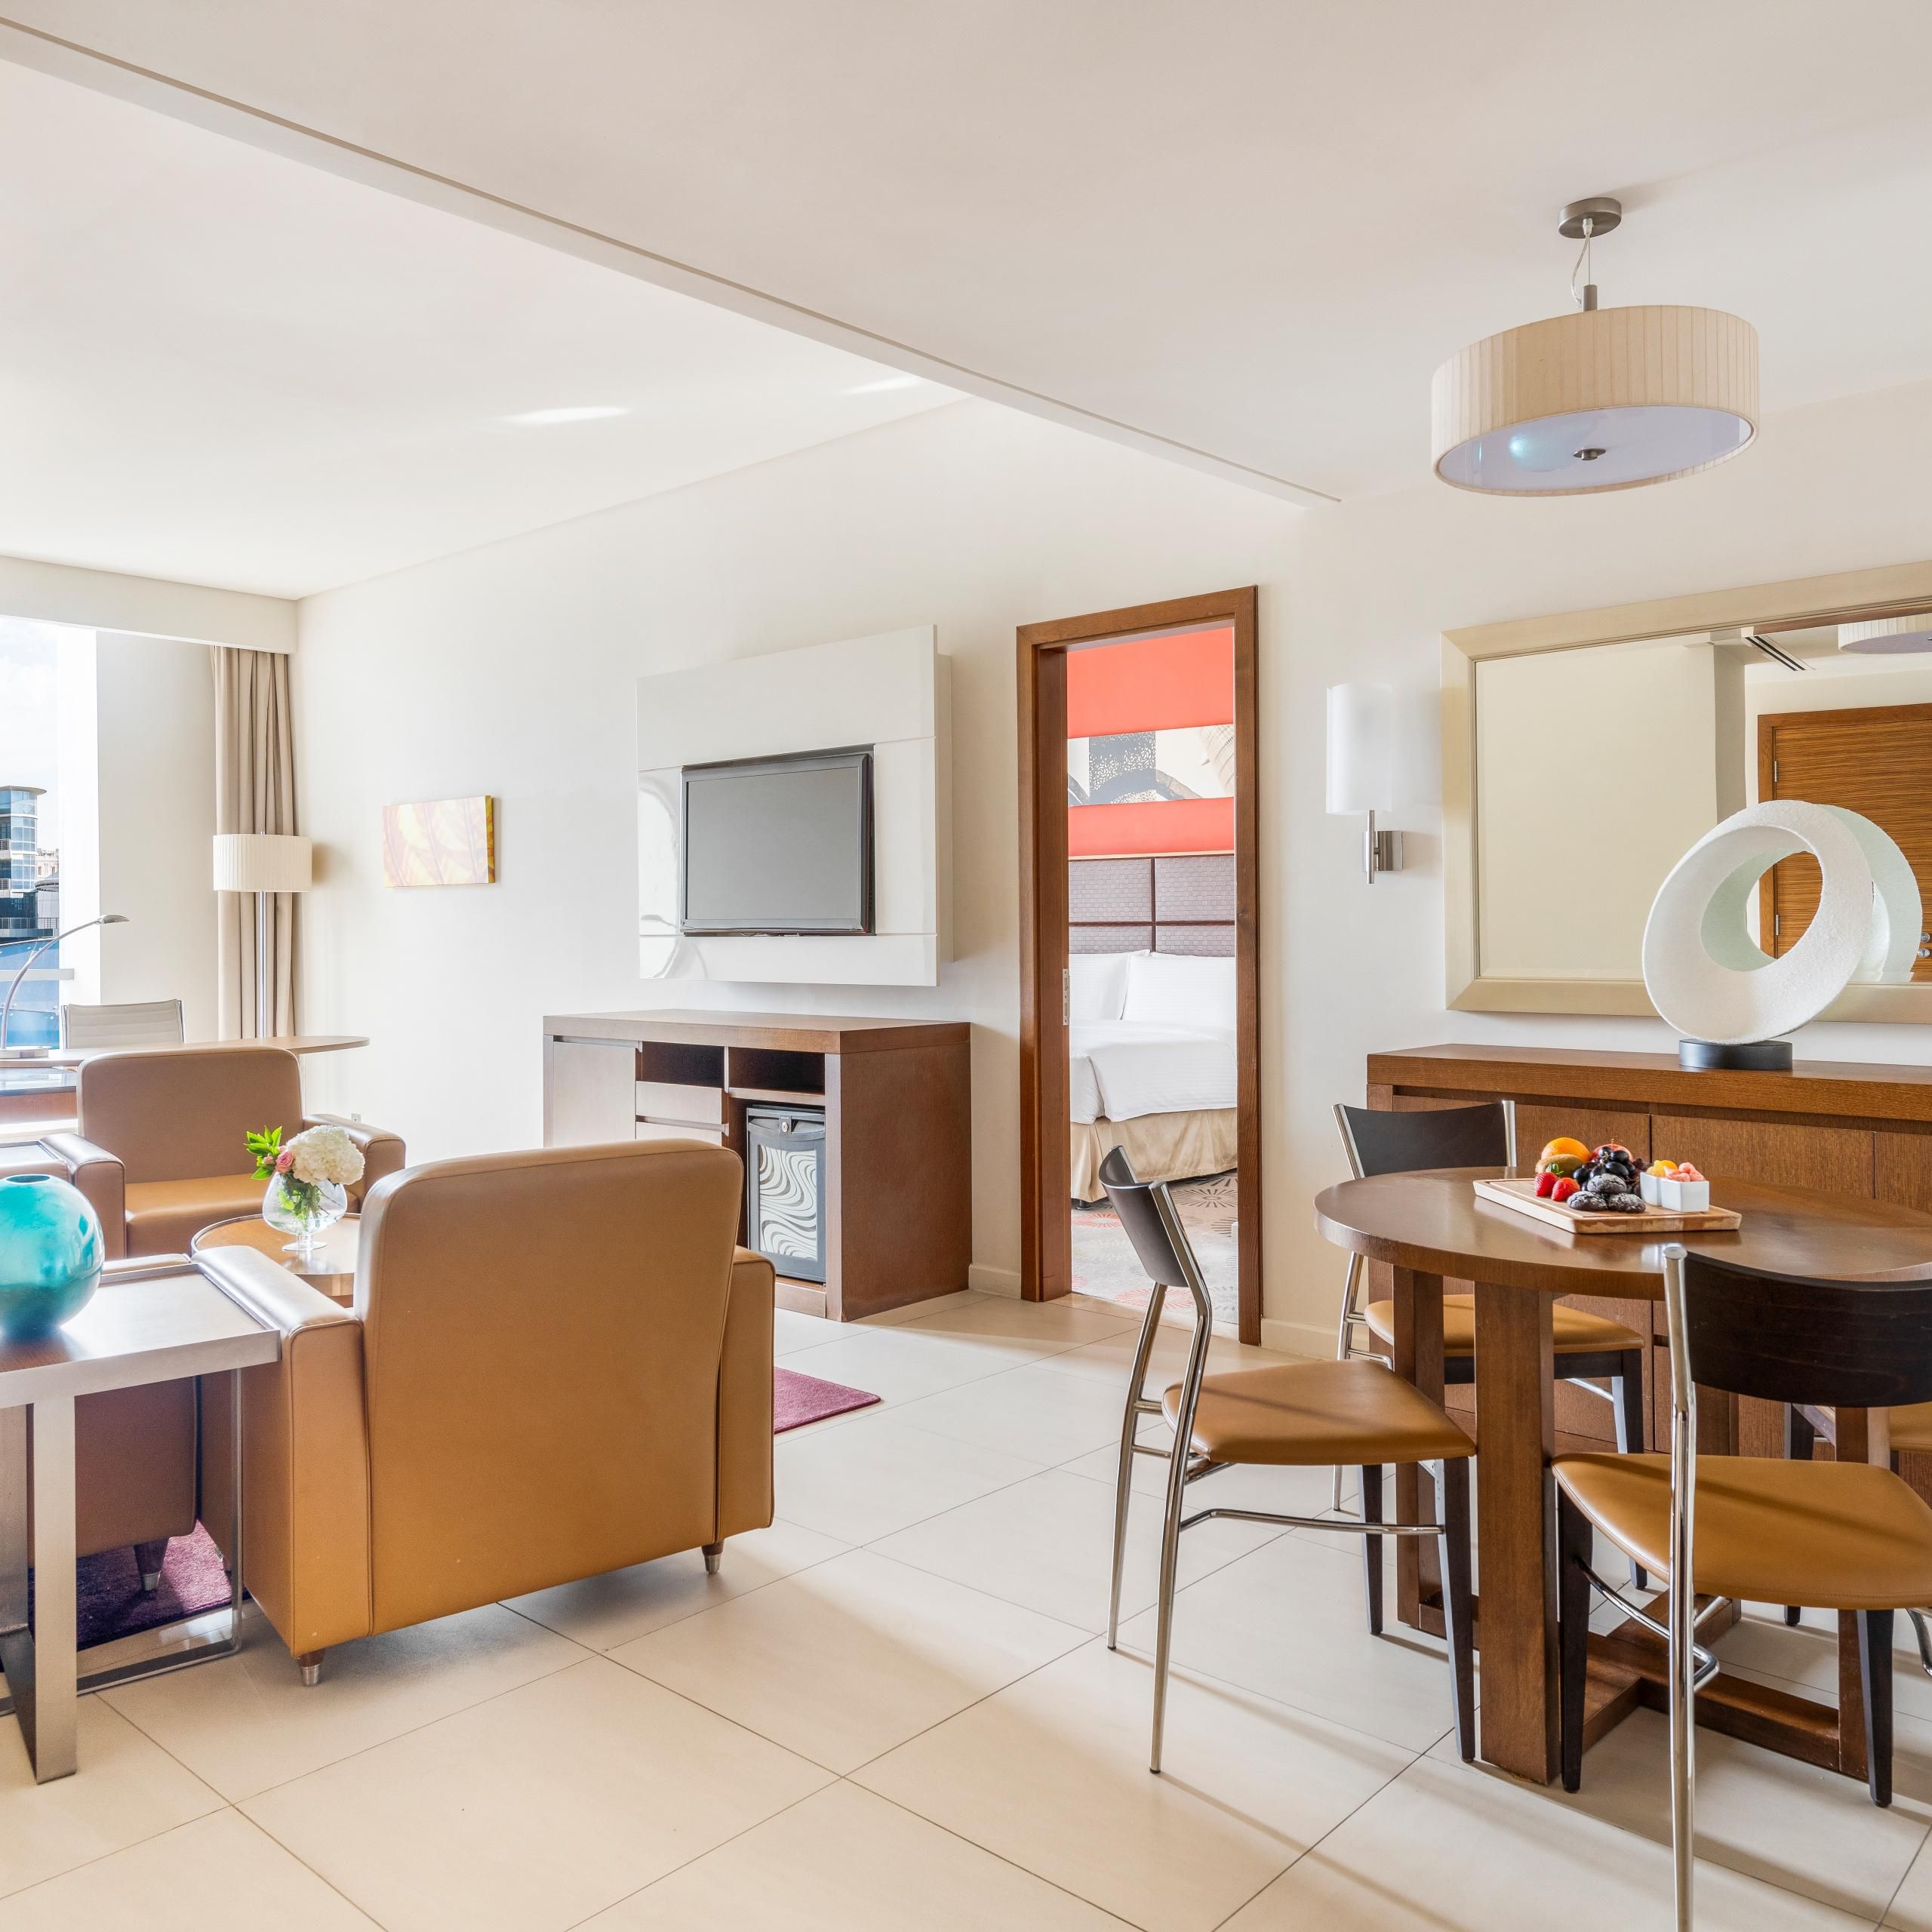 Our 2-Bedroom Apartment has more space and is ideal for families